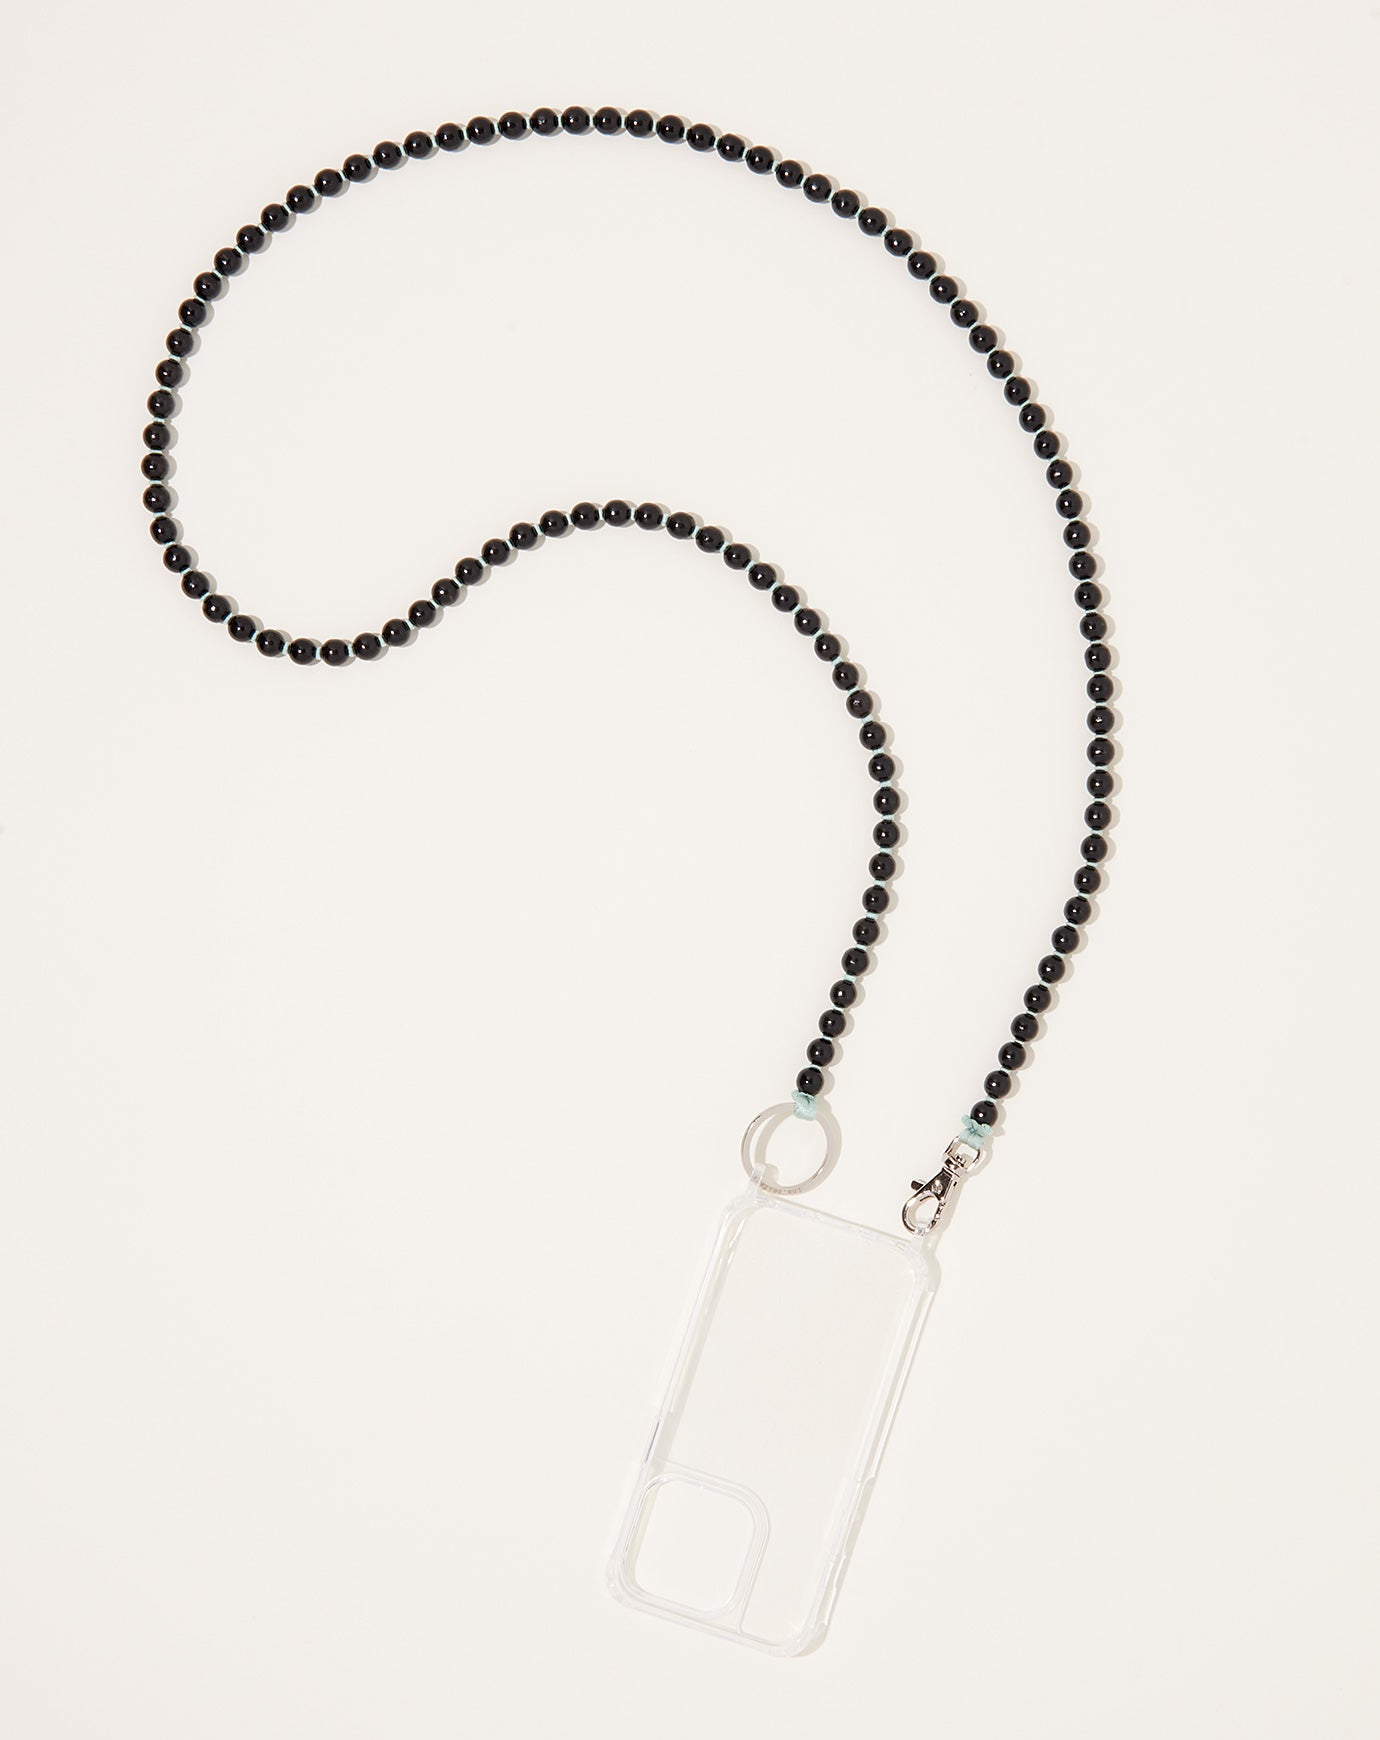 Ina Seifart Handykette iPhone Necklace in Black on Salvia